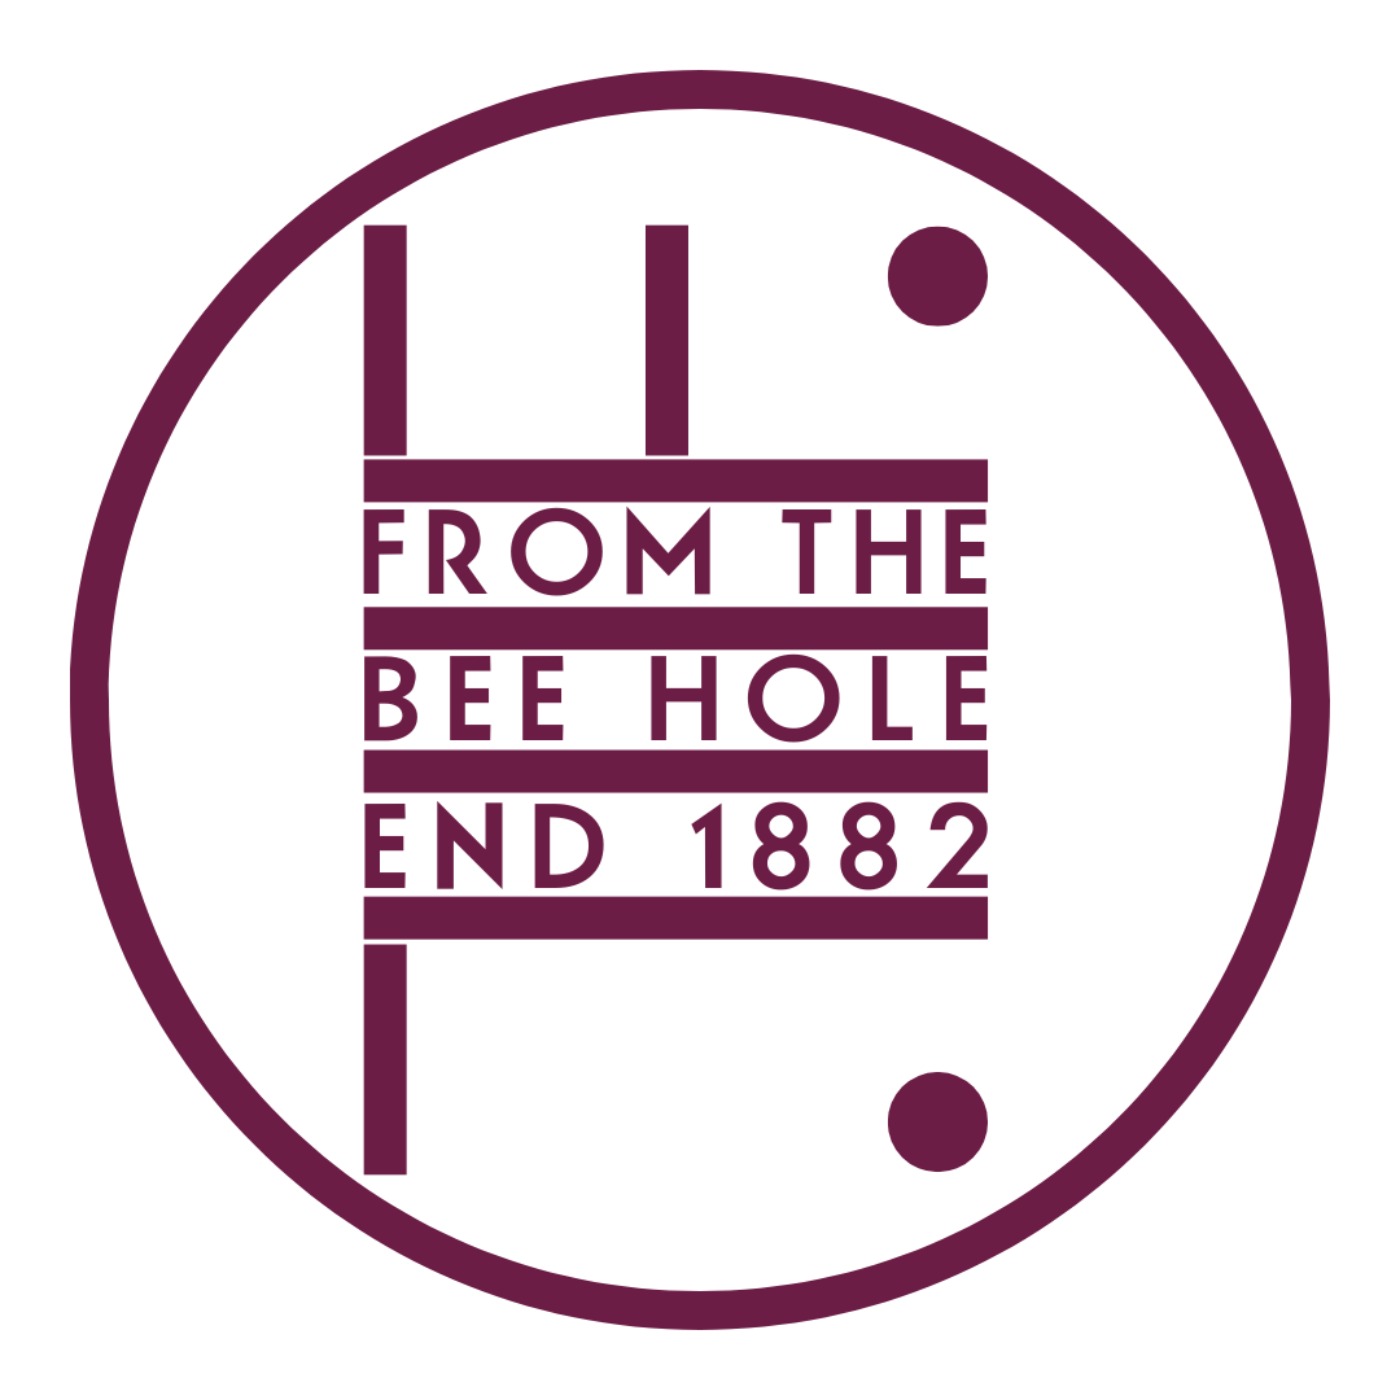 From the Bee Hole End - The Debrief - Aston Villa (away)